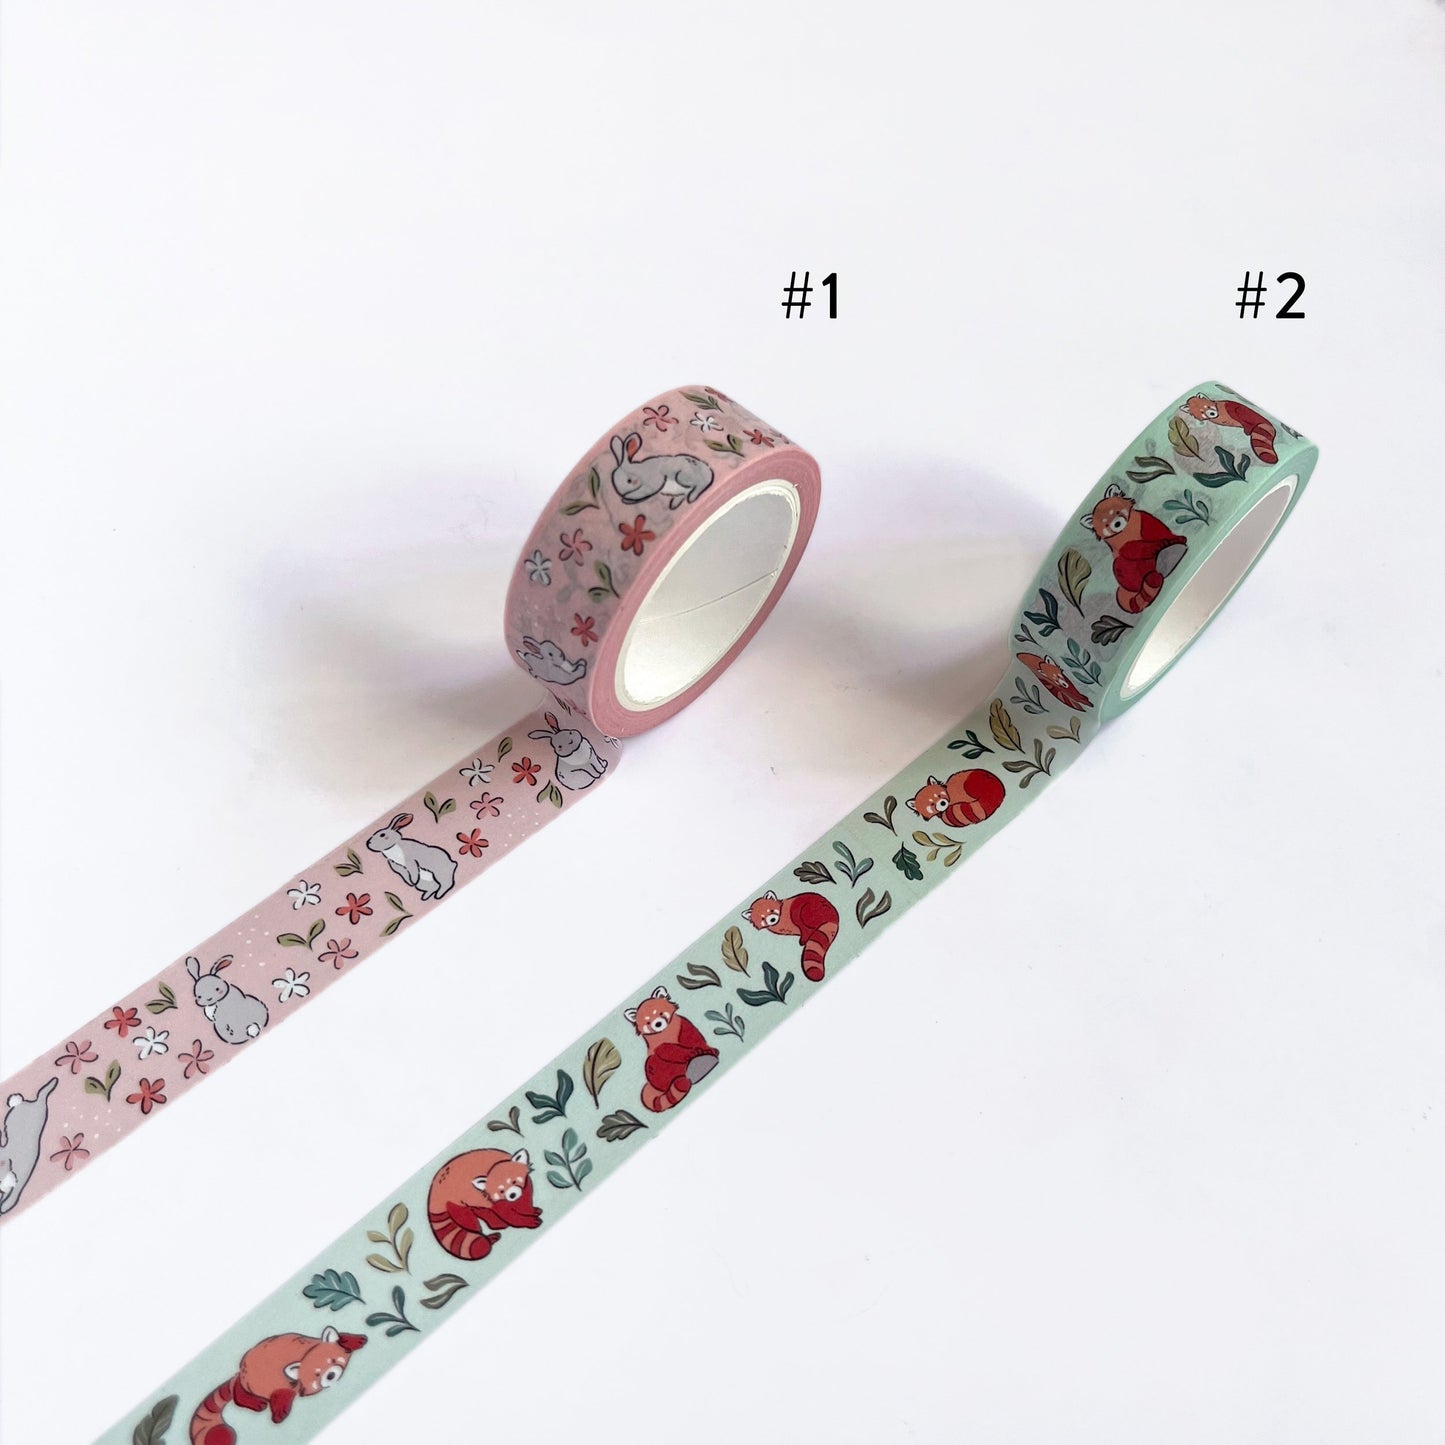 Forest Friends | Washi Tapes